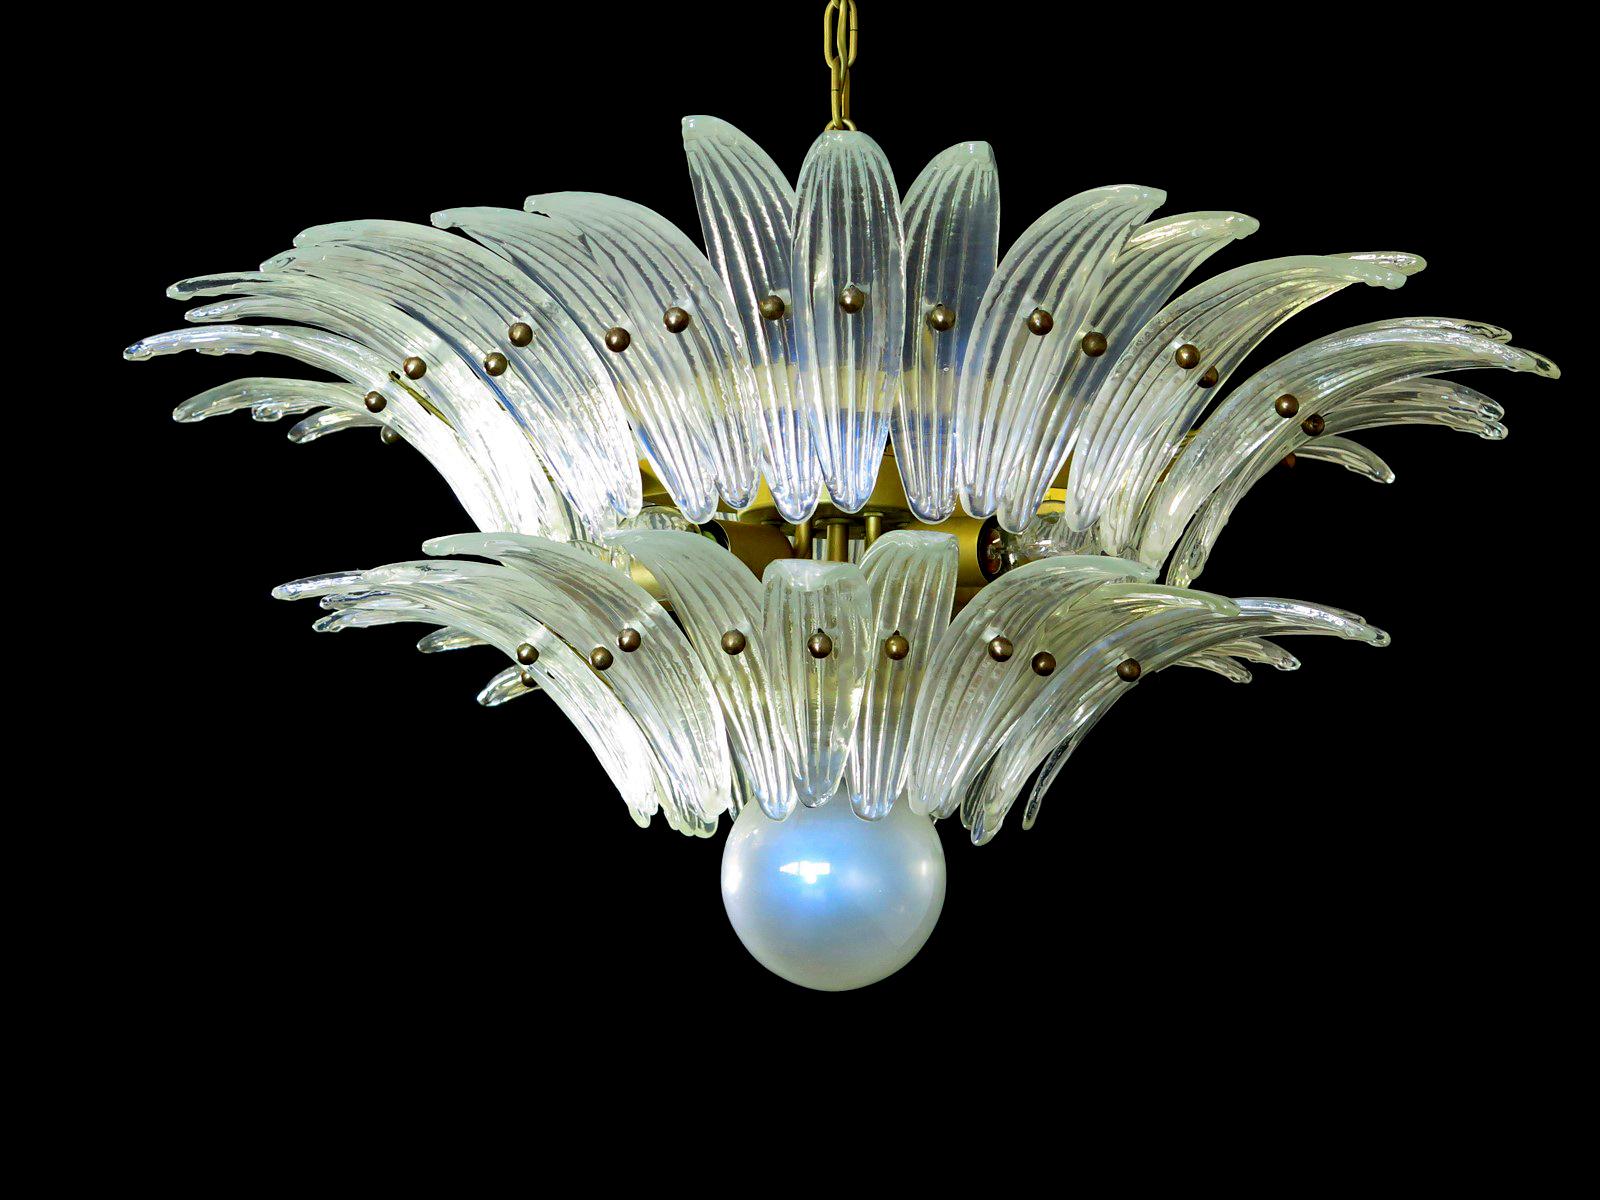 Murano chandelier original palmette, opal iridiscent glass
Luxury and Genuine Murano glass chandelier. Handmade in Murano. It made by 58 Murano crystal
glasses in a gold metal frame. The chandelier has also a Murano glass ball in the end of the